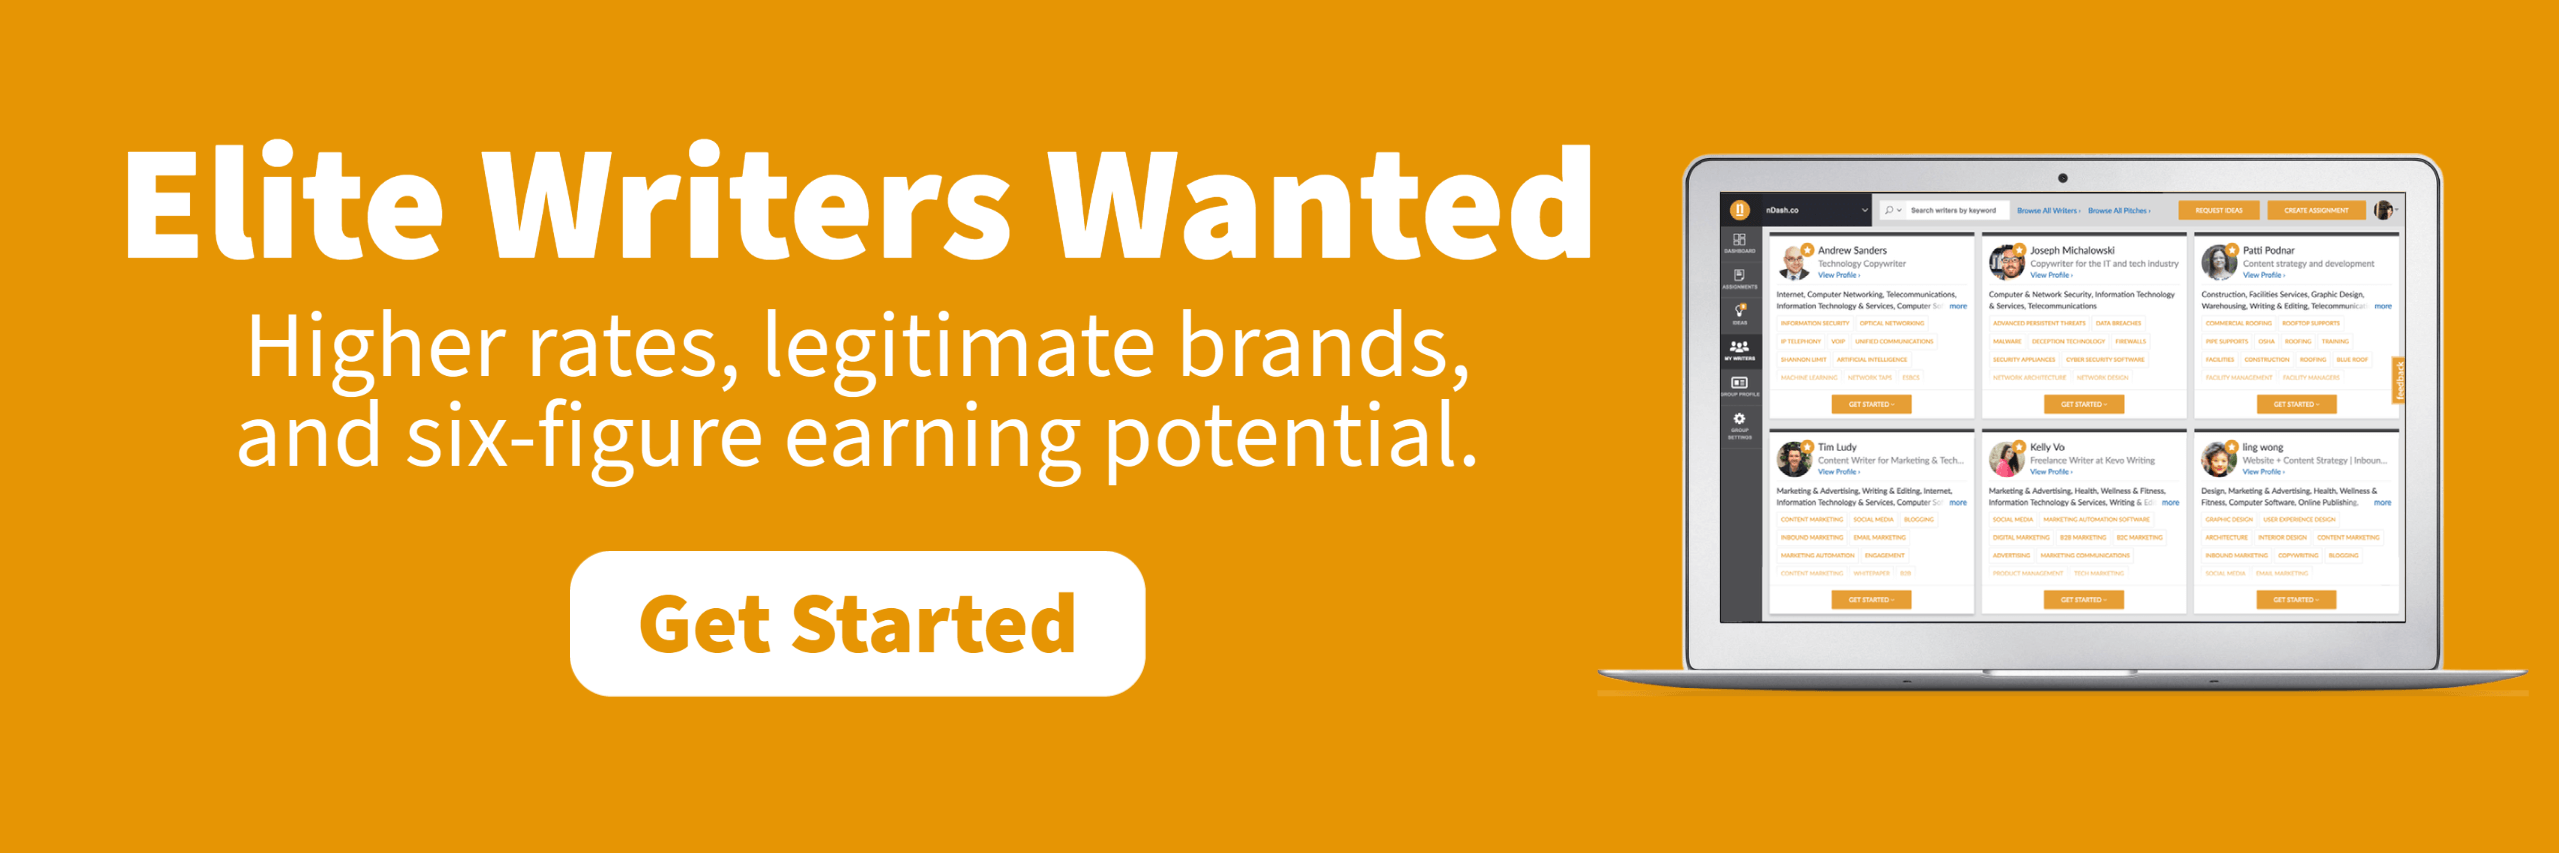 Elite Writers Wanted: Higher rates, legitimate brands, and six-figure earning potential.